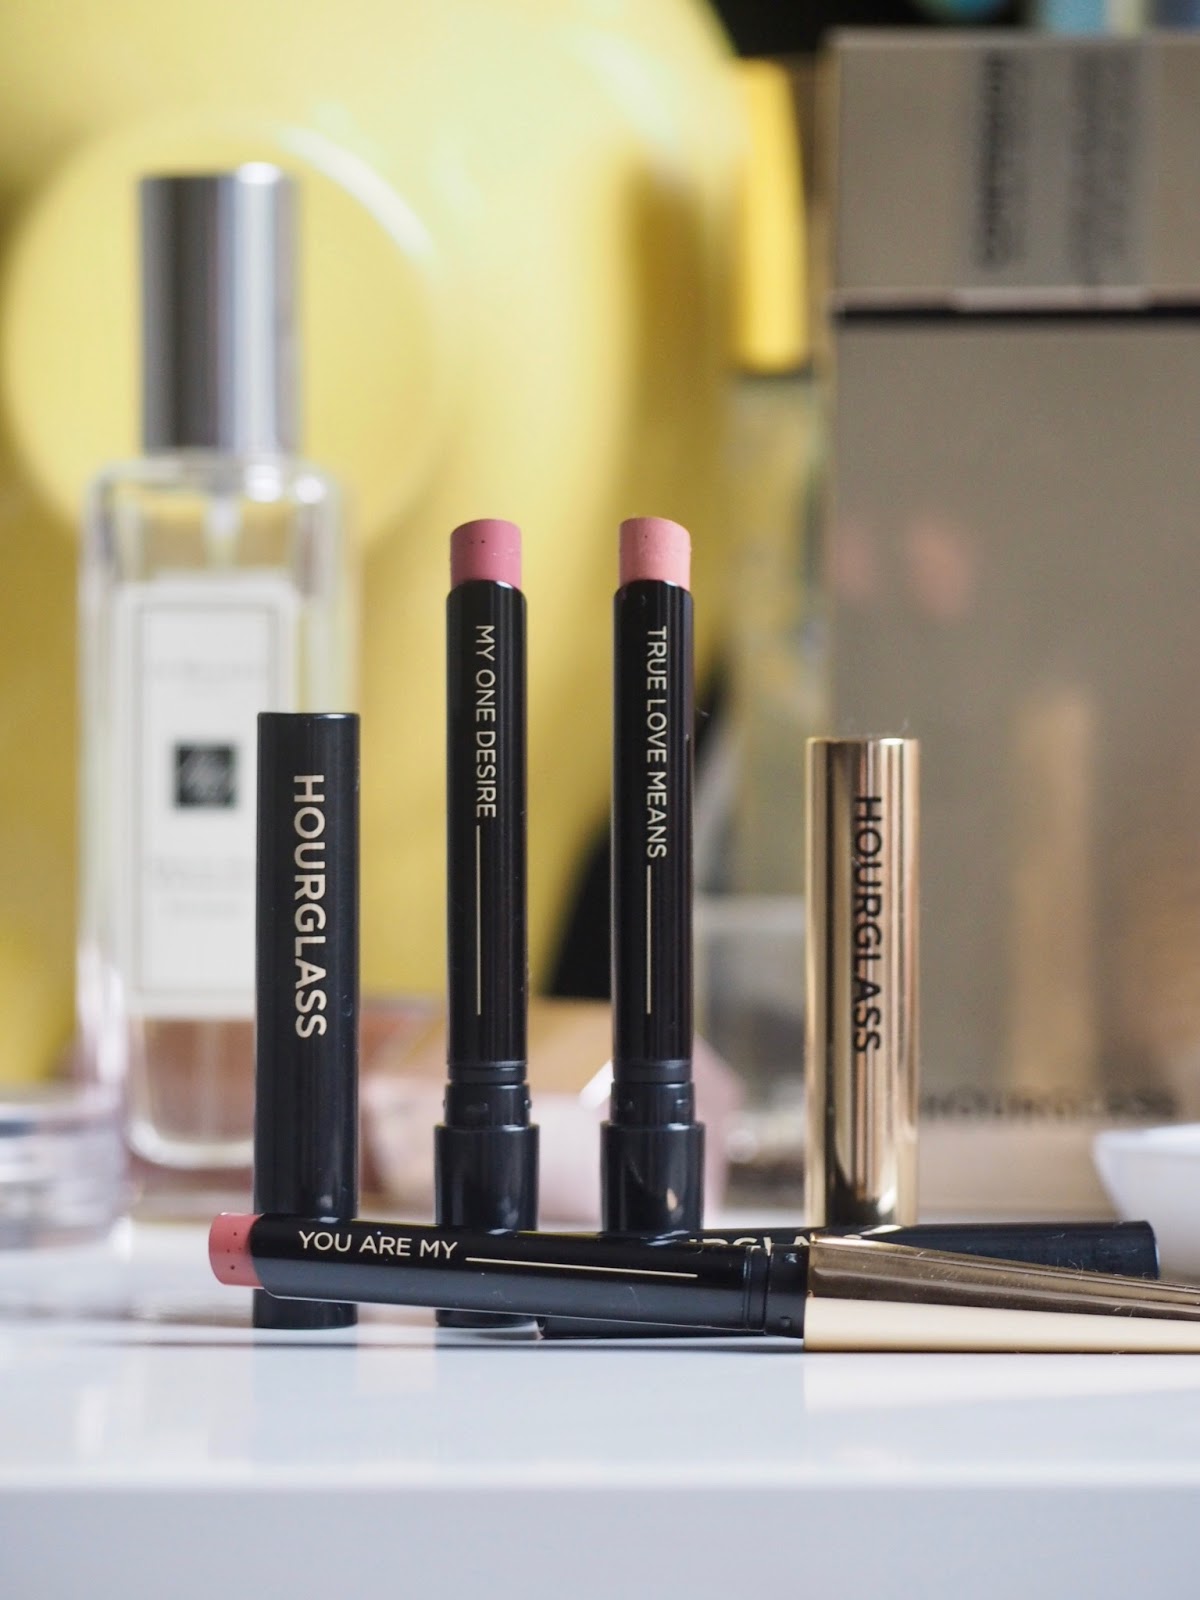 Hourglass Confessions Refillable Lipstick Set + Swatches